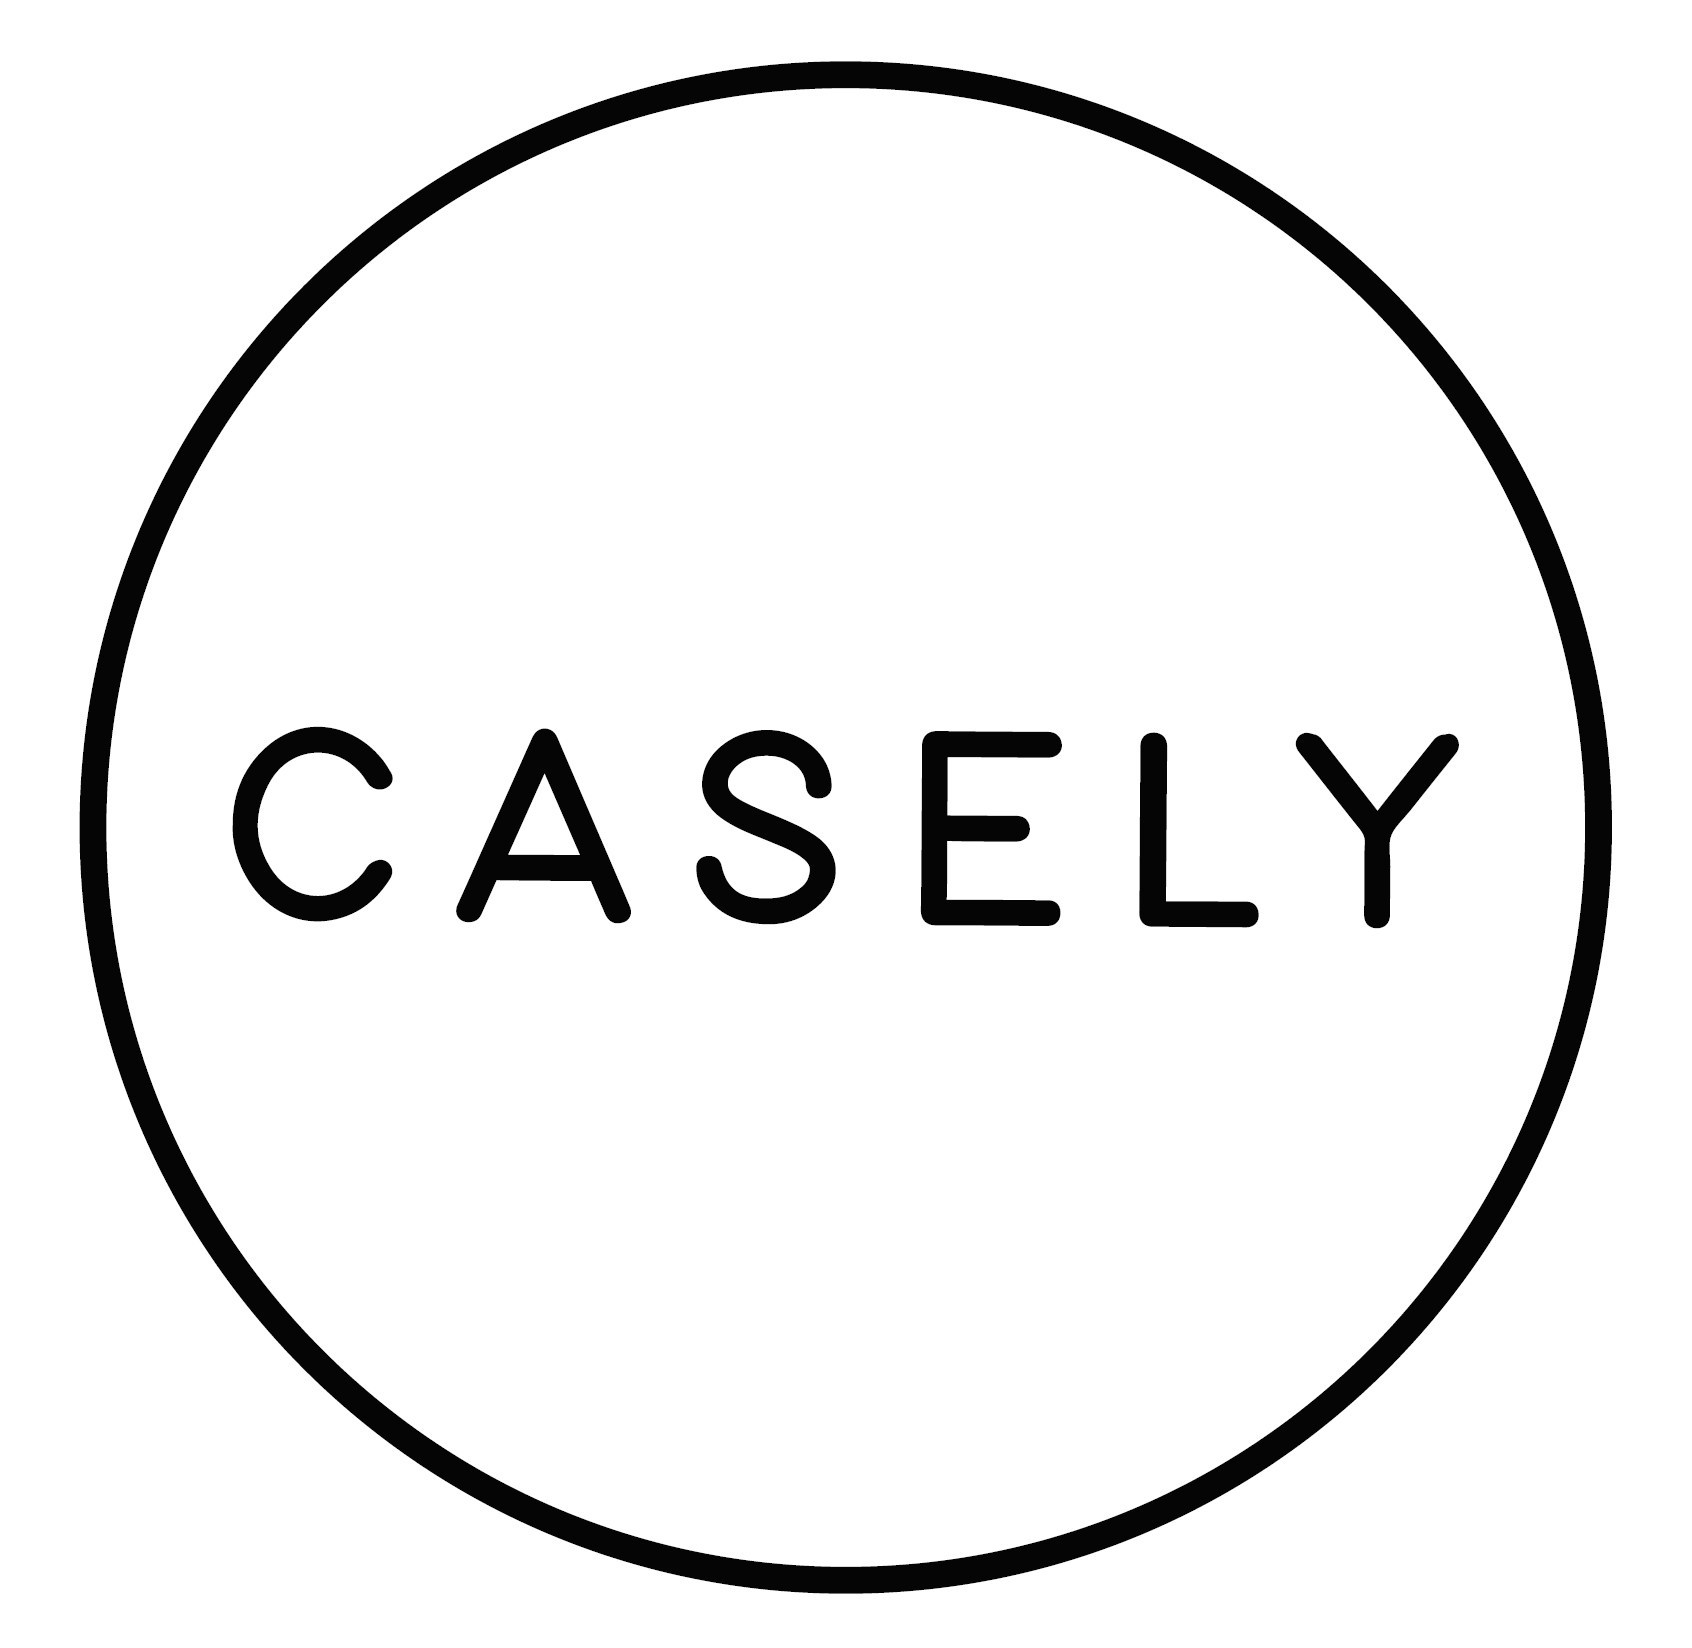 30% Off With Casely Discount Code